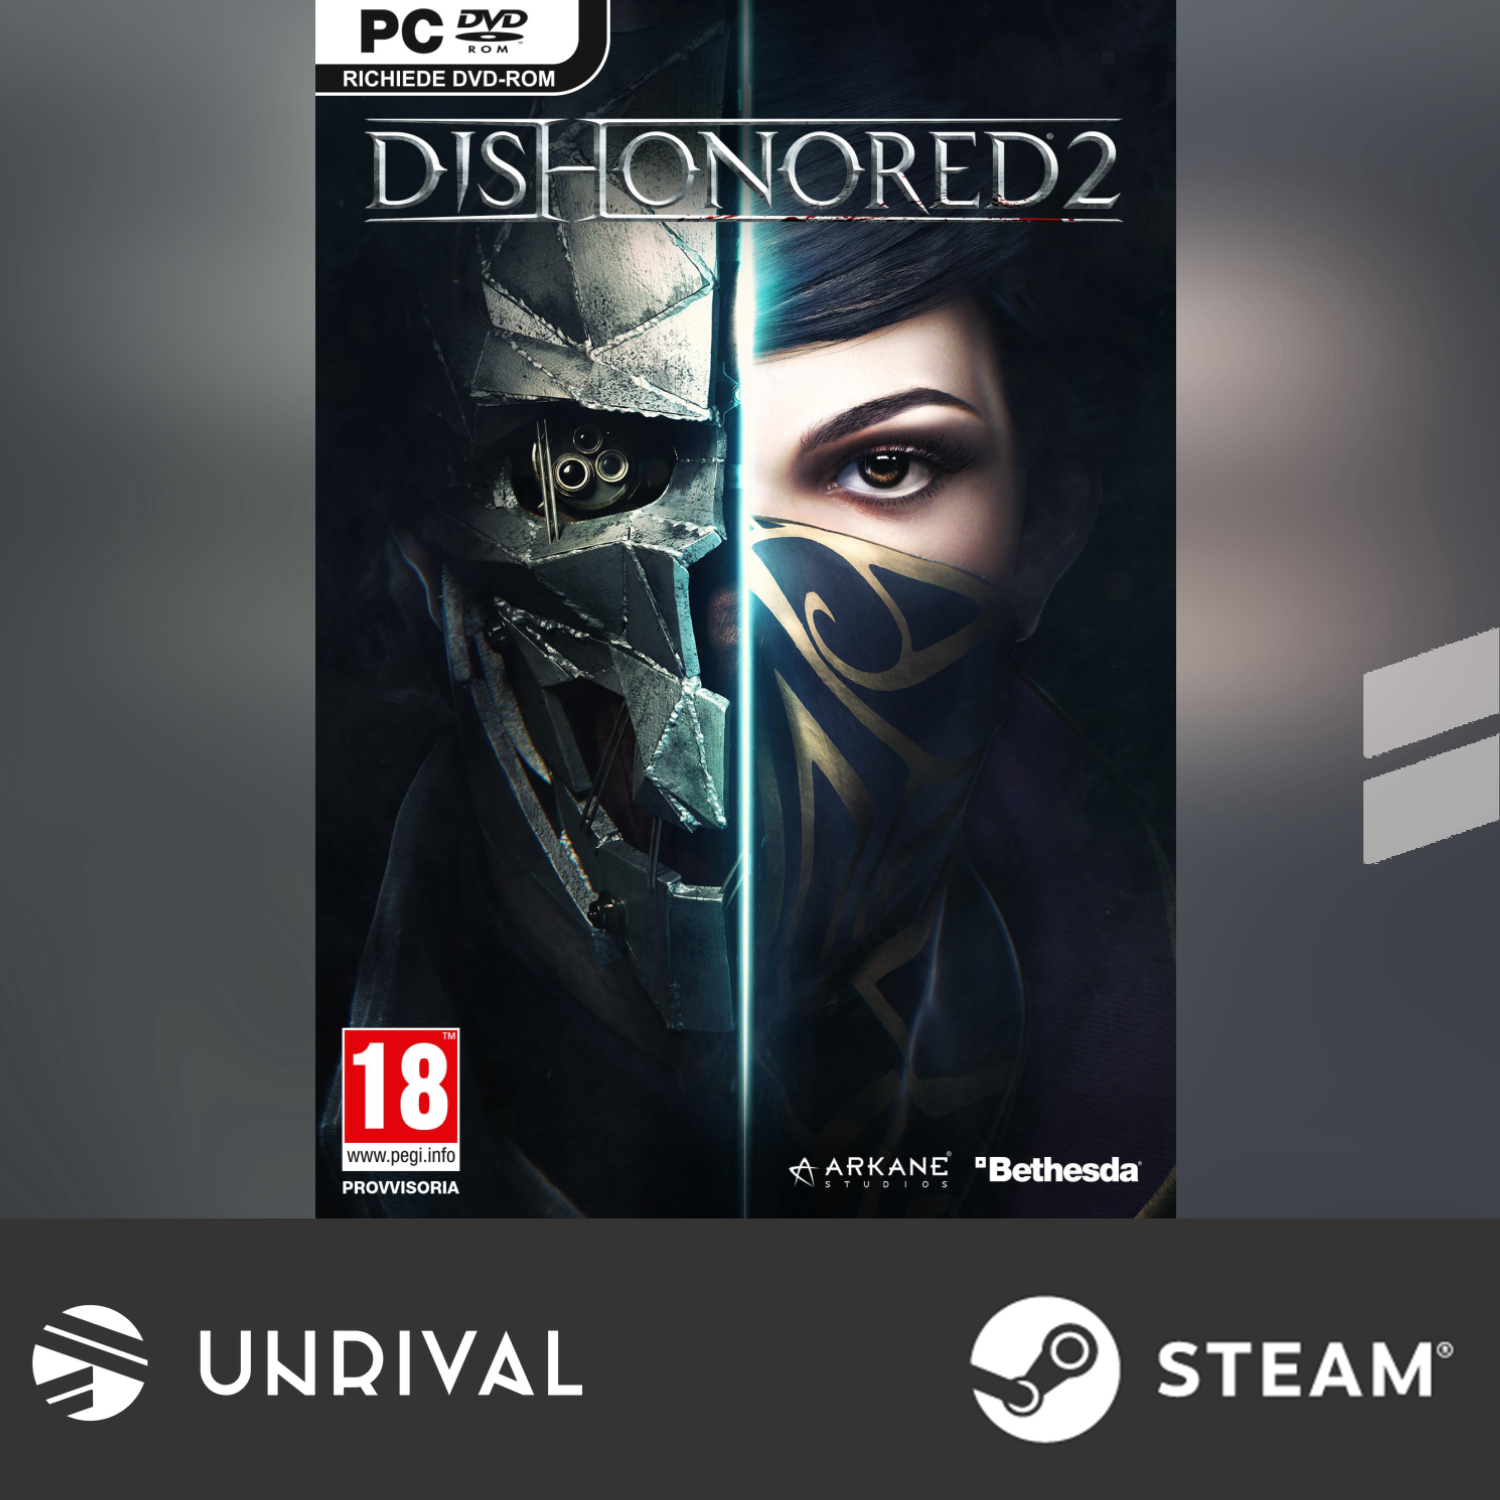 download dishonored 2 when going on sale